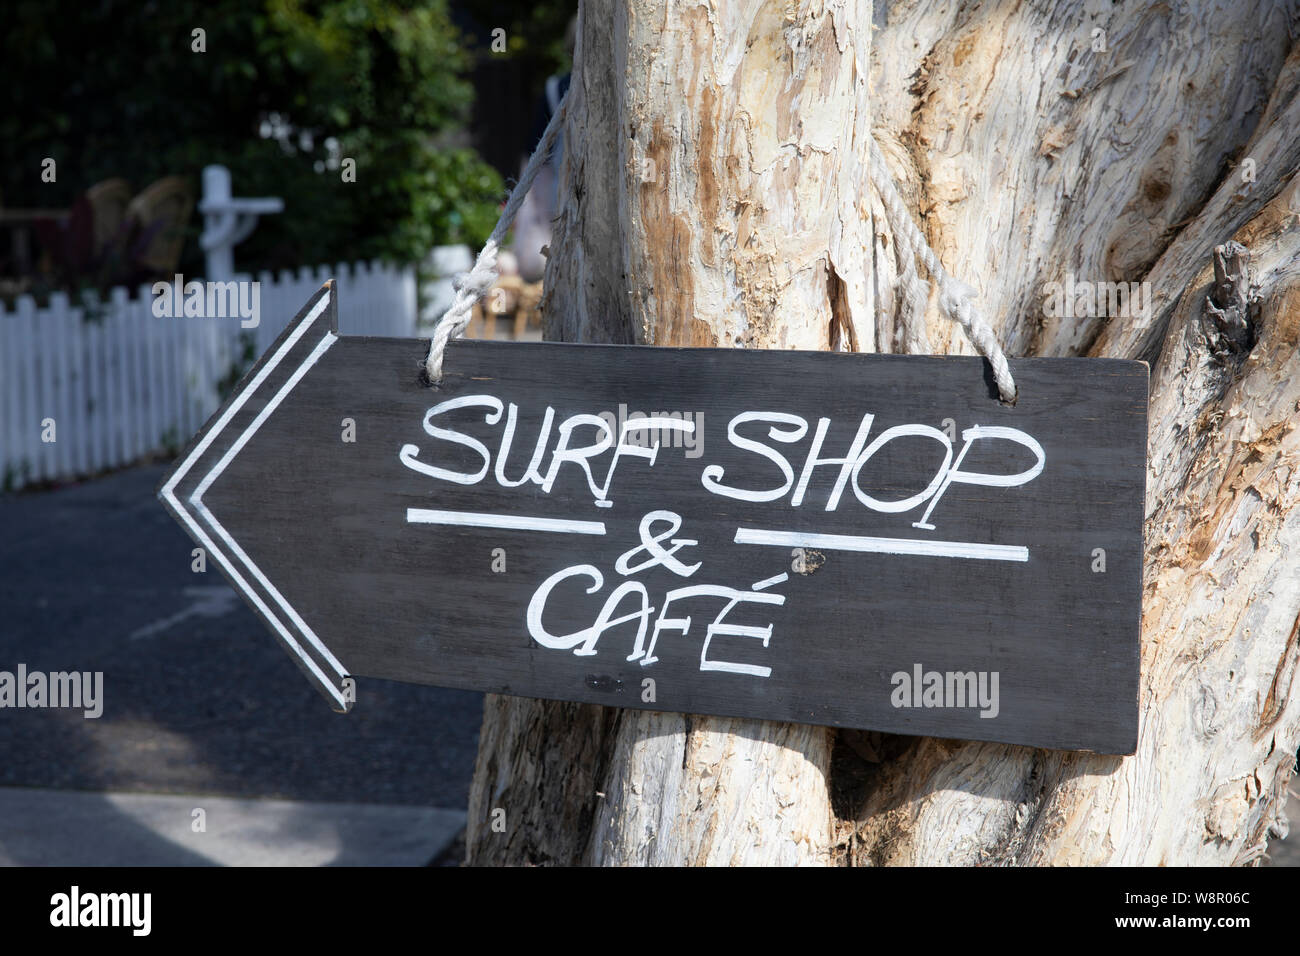 Surf Shop Cafe High Resolution Stock Photography and Images - Alamy